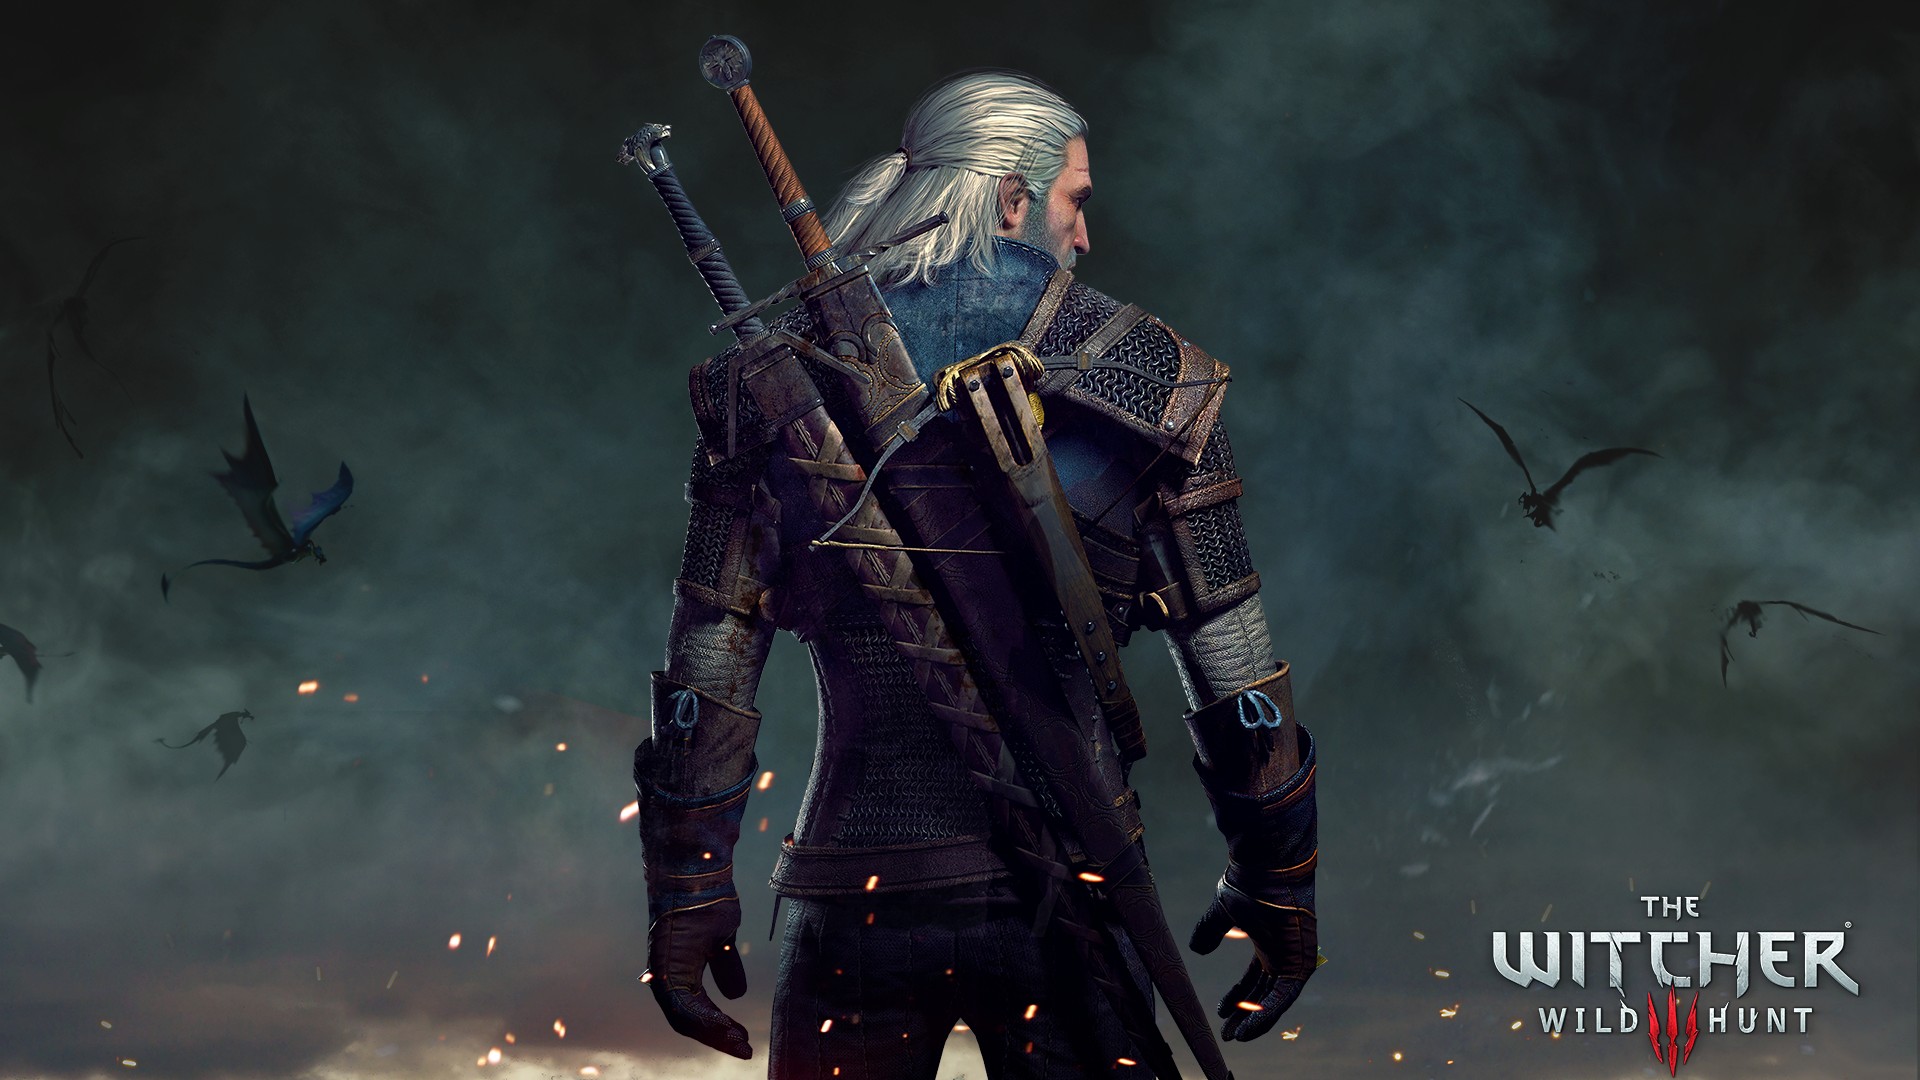 Wallpapers Computer The Witcher with high-resolution 1920x1080 pixel. You can use this wallpaper for your Desktop Computer Backgrounds, Mac Wallpapers, Android Lock screen or iPhone Screensavers and another smartphone device